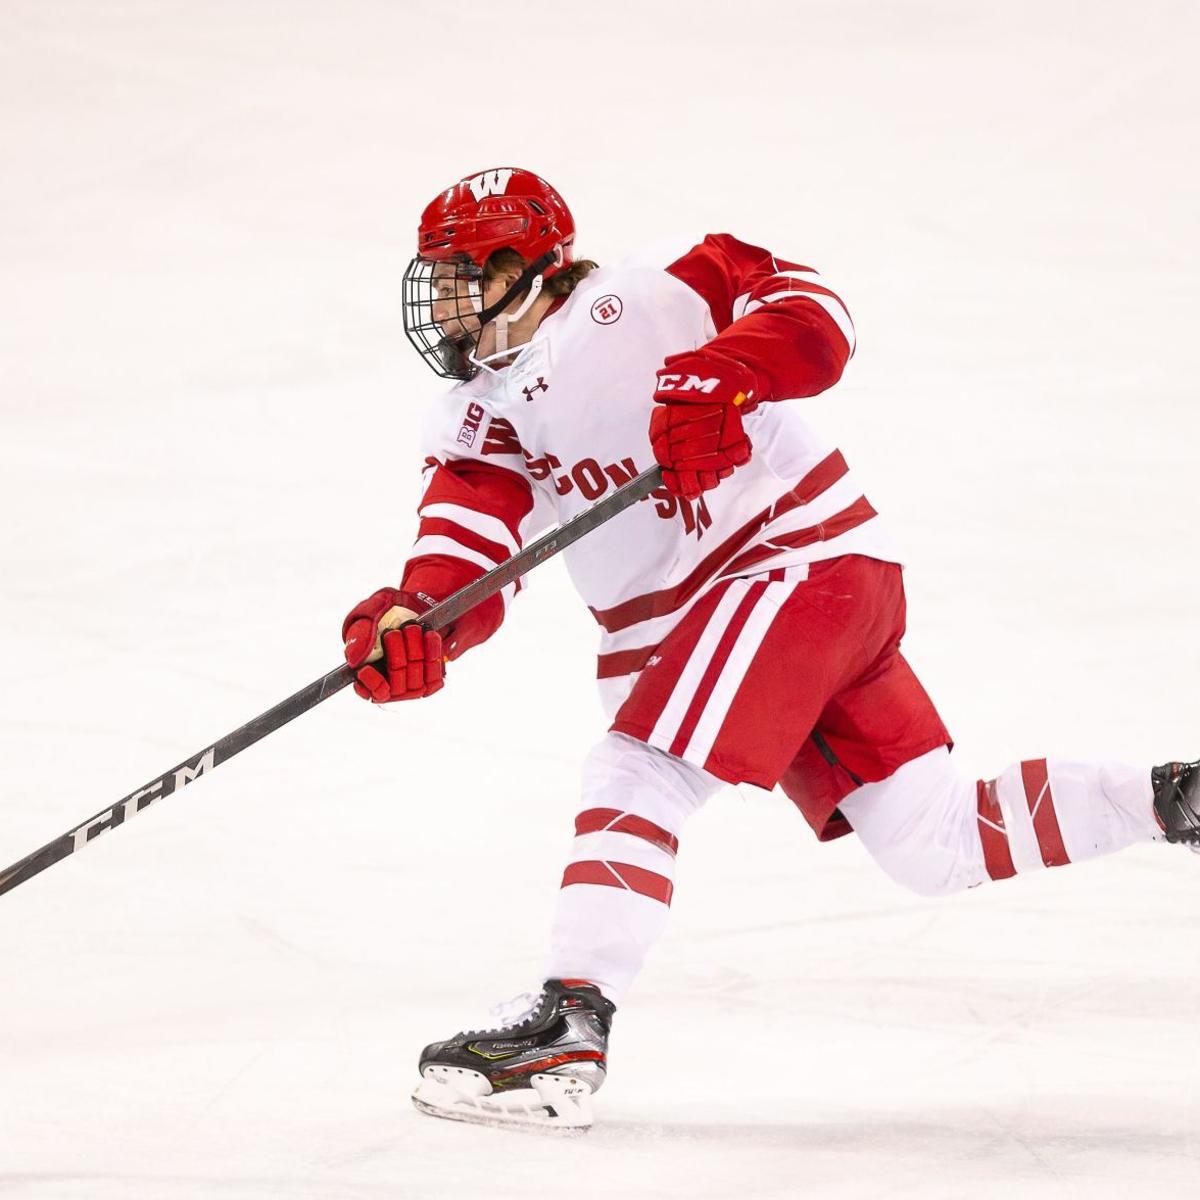 Watch now: Cole Caufield's remarkable shot, and how it compares to his Badgers predecessors. Wisconsin Badgers Hockey